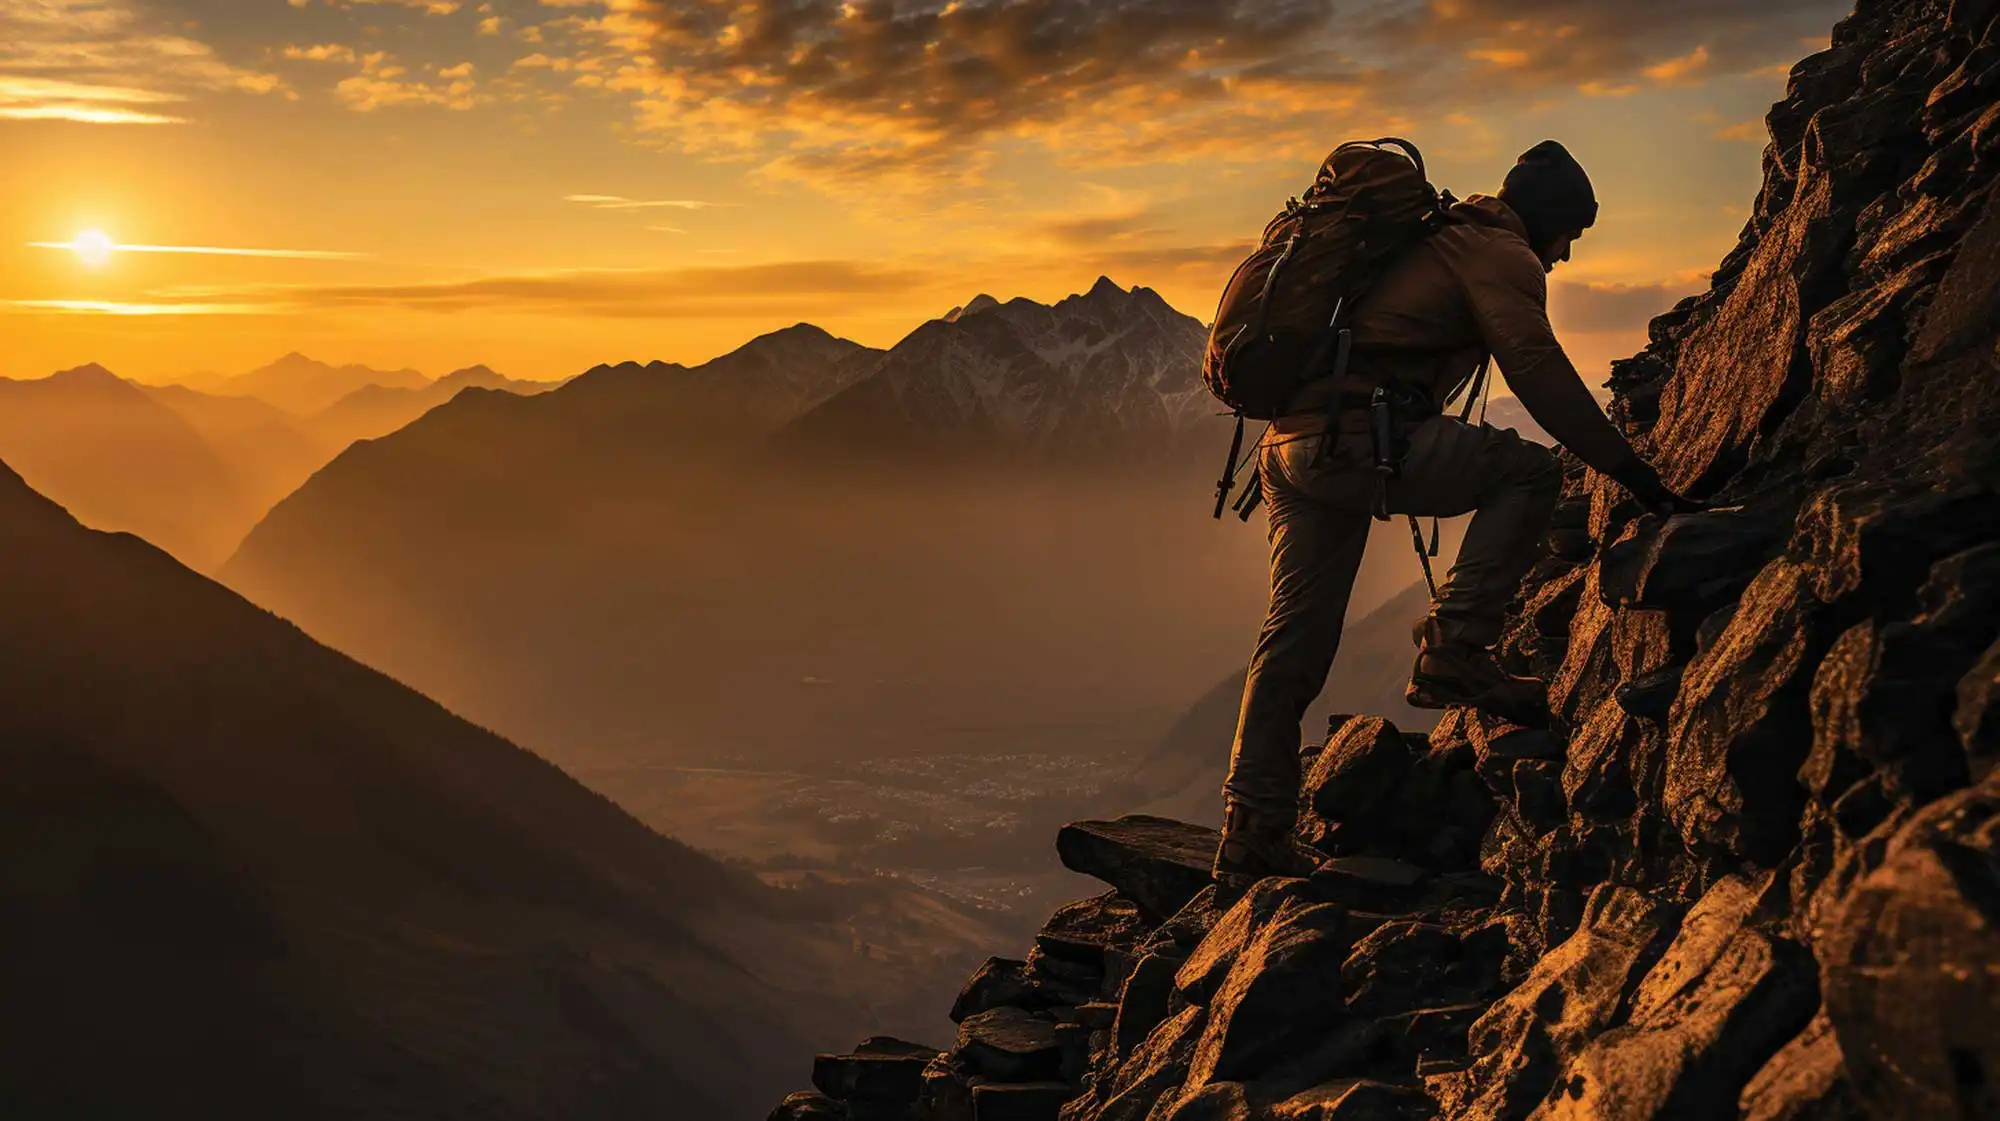 Adventurous hiker ascending a rugged mountain trail at sunset, with the golden sun casting a warm glow over the majestic peaks in the distance.